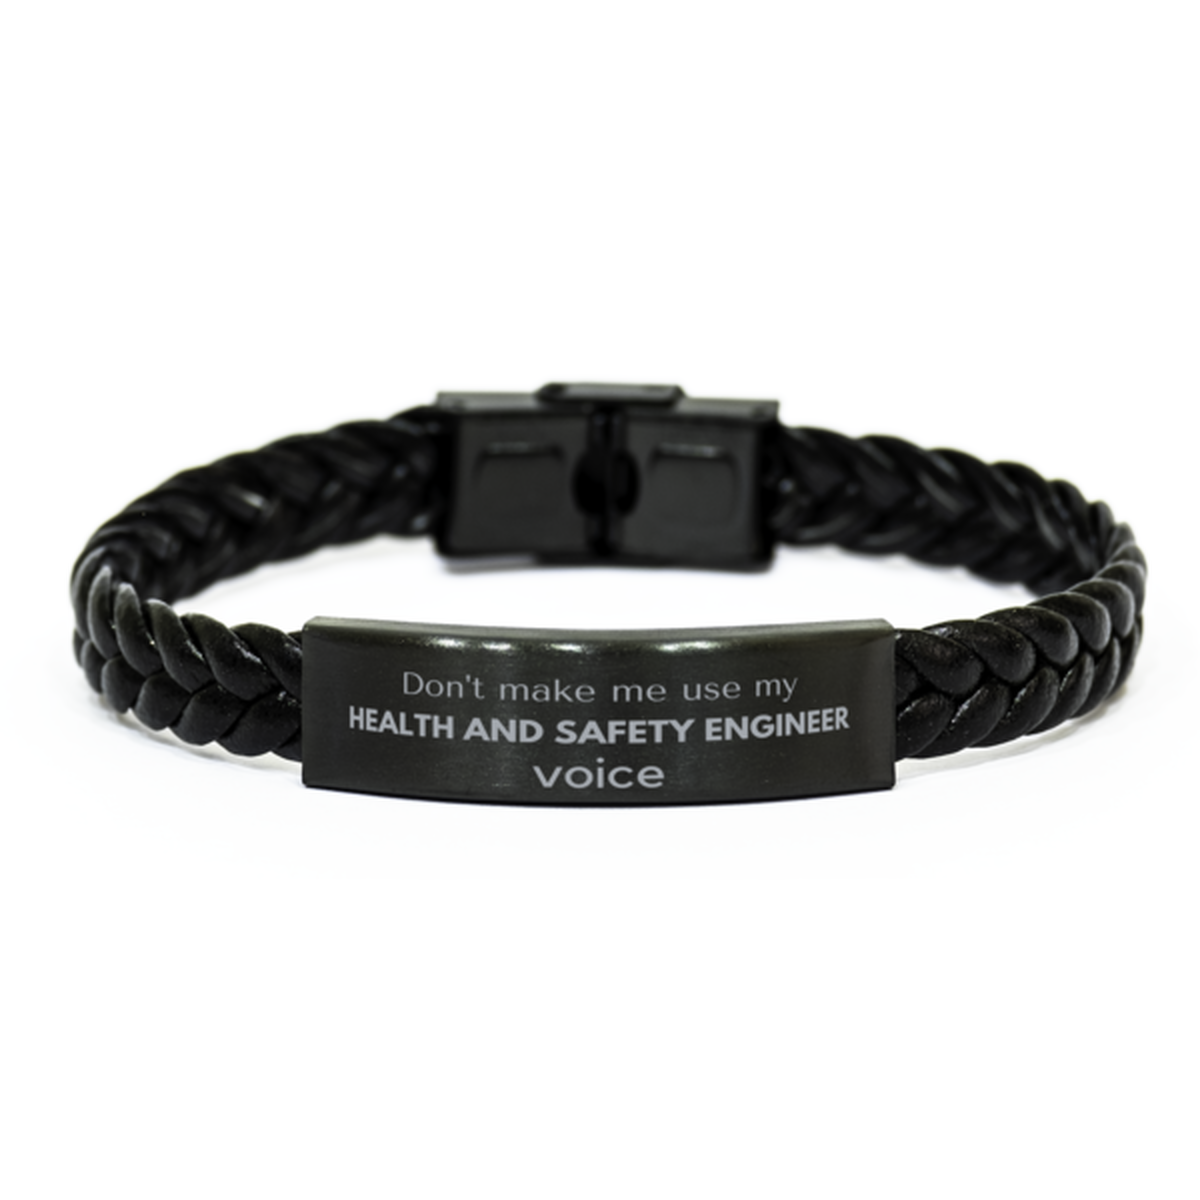 Don't make me use my Health and Safety Engineer voice, Sarcasm Health and Safety Engineer Gifts, Christmas Health and Safety Engineer Braided Leather Bracelet Birthday Unique Gifts For Health and Safety Engineer Coworkers, Men, Women, Colleague, Friends